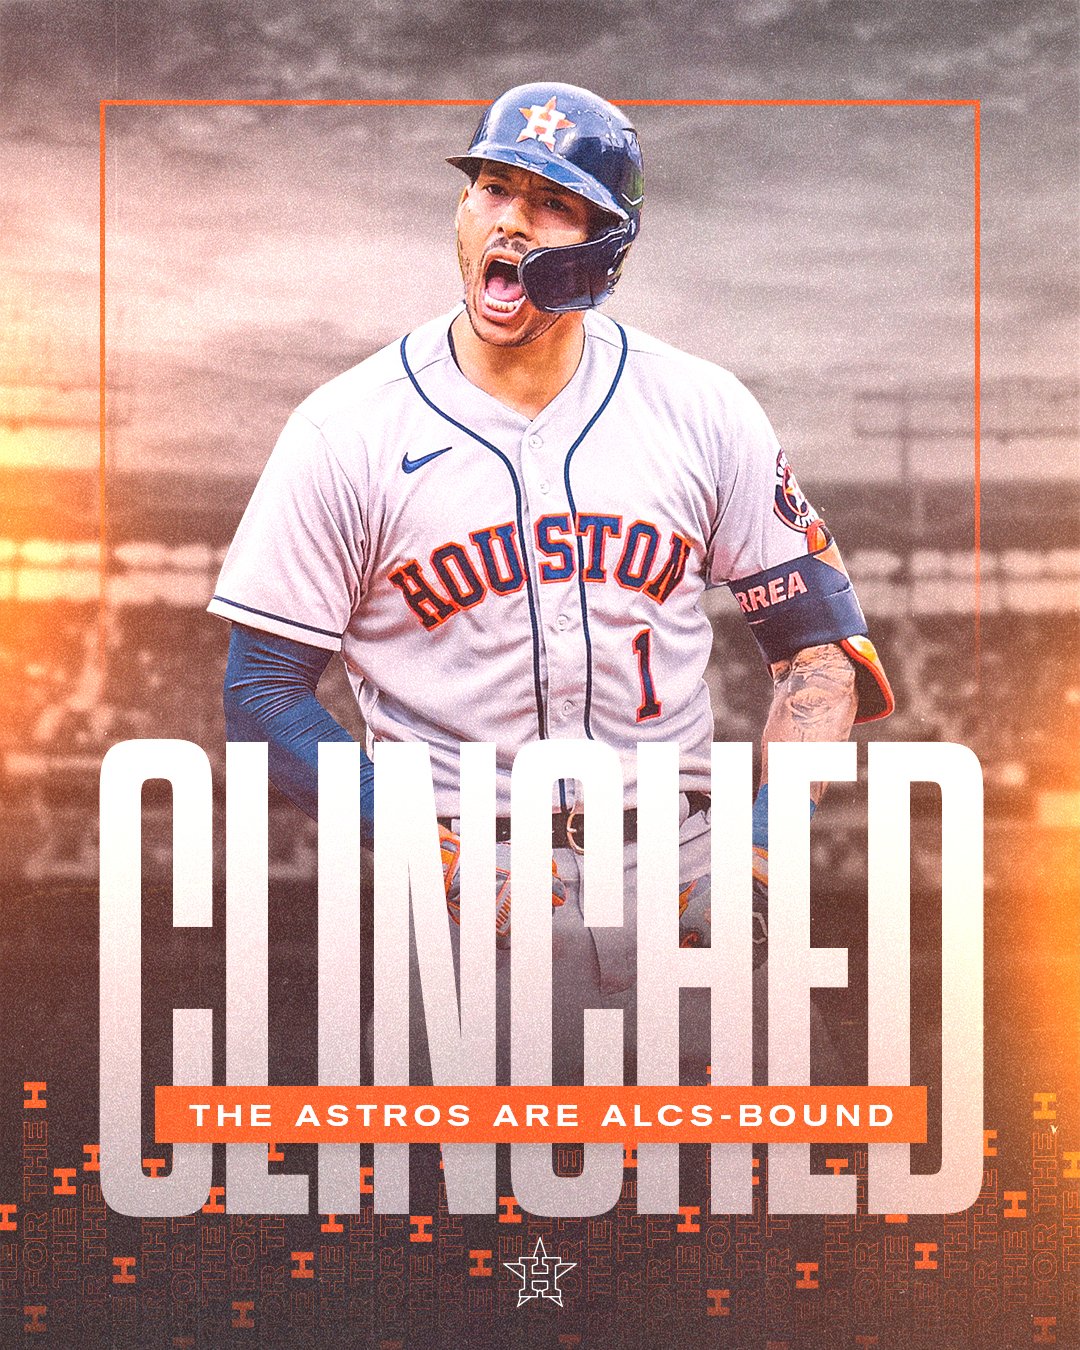 A Family Of One: Houston Astros Headed To Their Fifth Consecutive ALCS, Houston Style Magazine